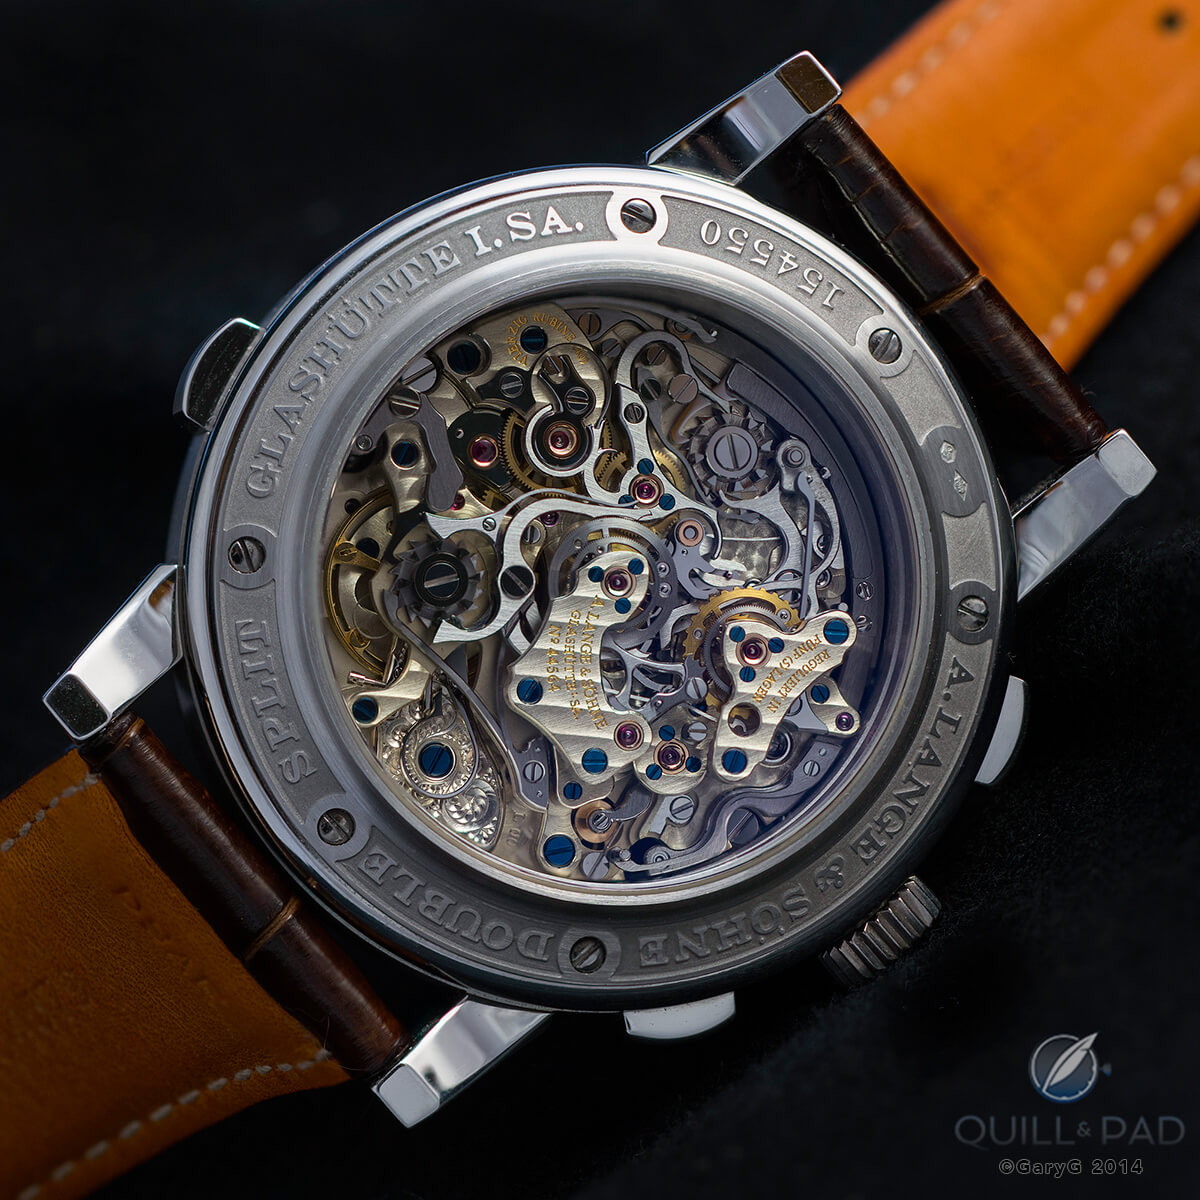 Reverse side of the A. Lange & Söhne Double Split with deep relief bezel engraving